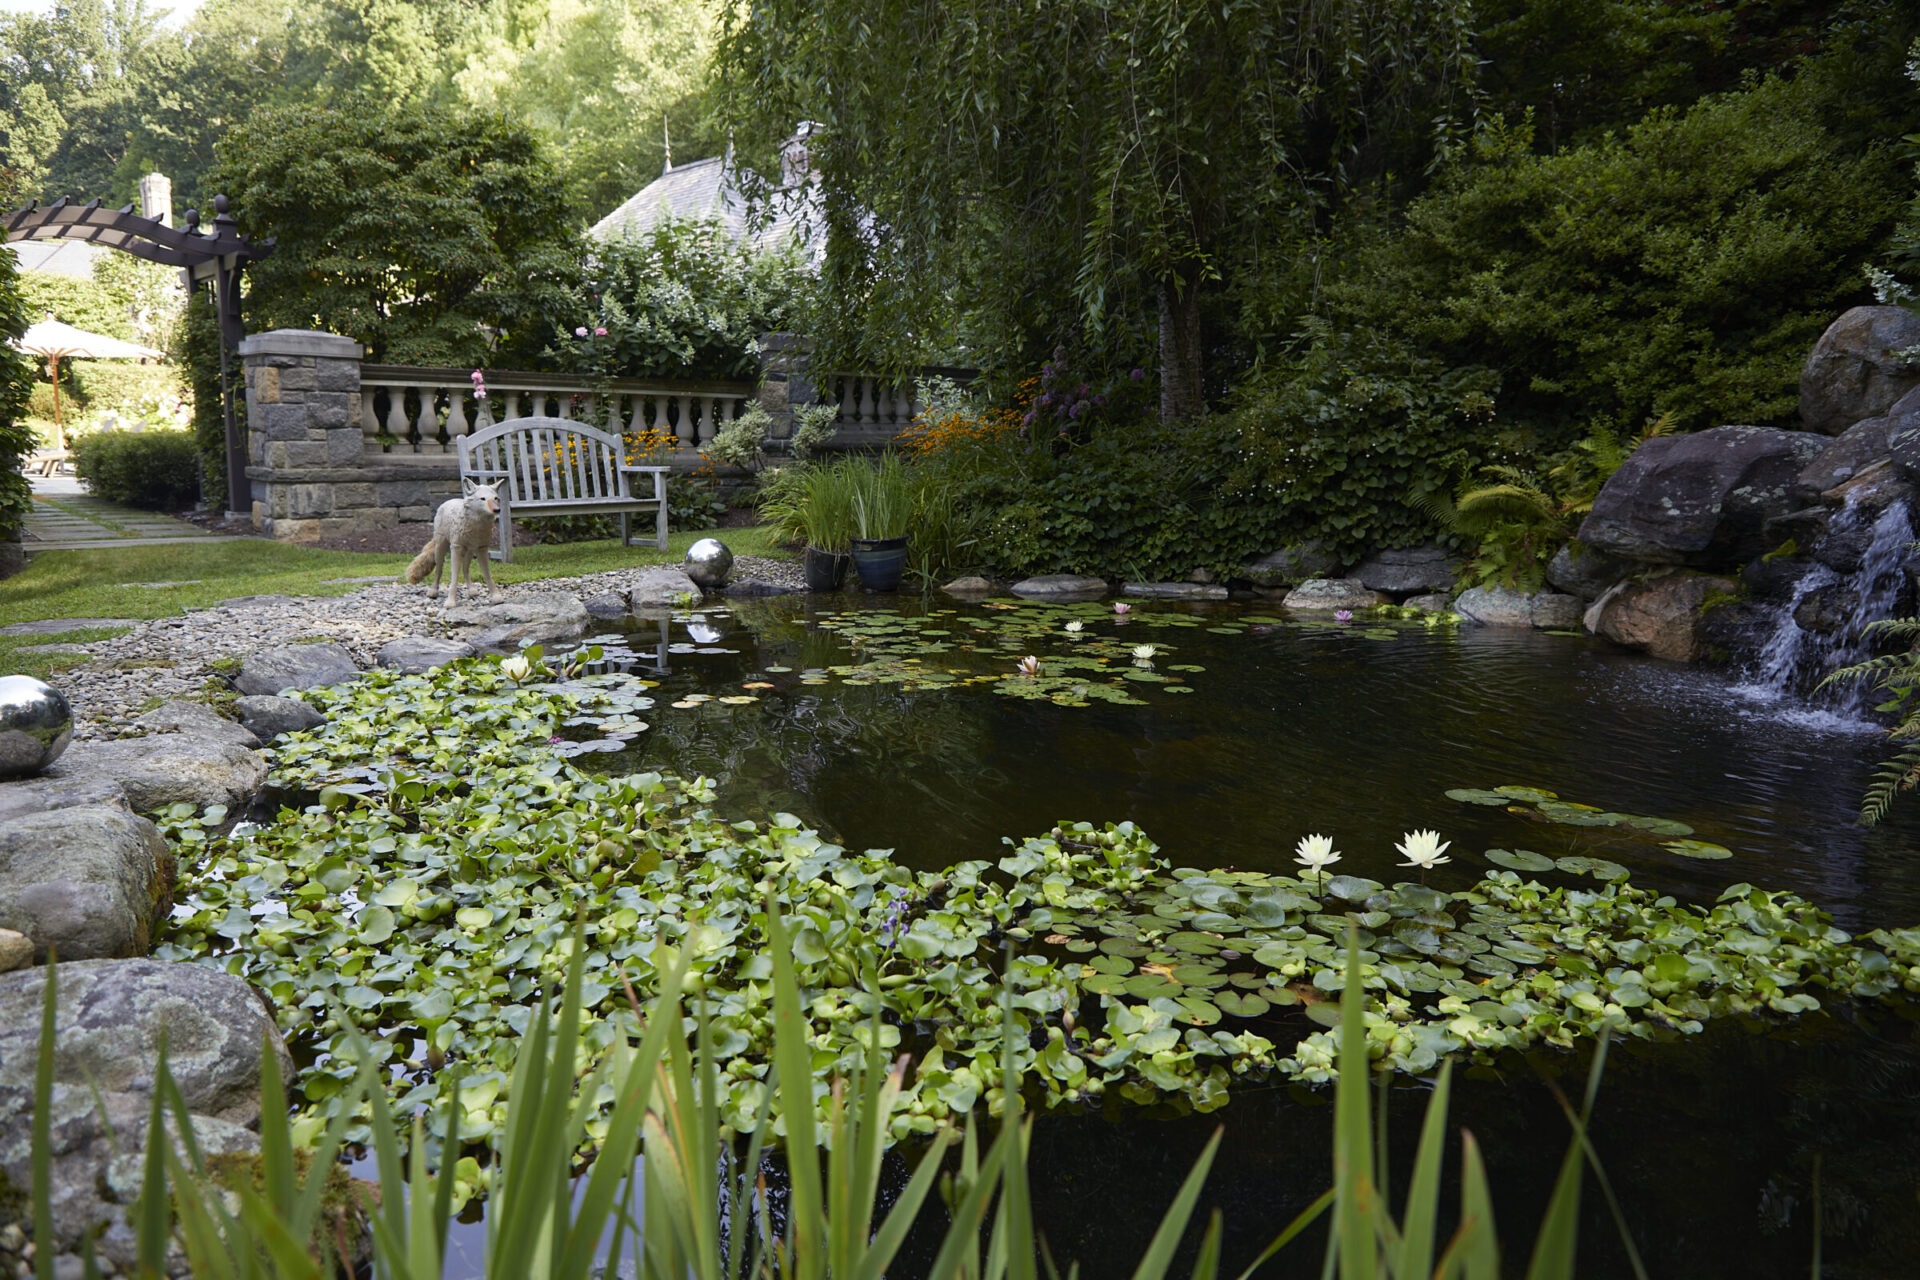 A tranquil garden with a pond full of water lilies, a waterfall, a dog standing on rocks, foliage around, and a garden bench in the background.